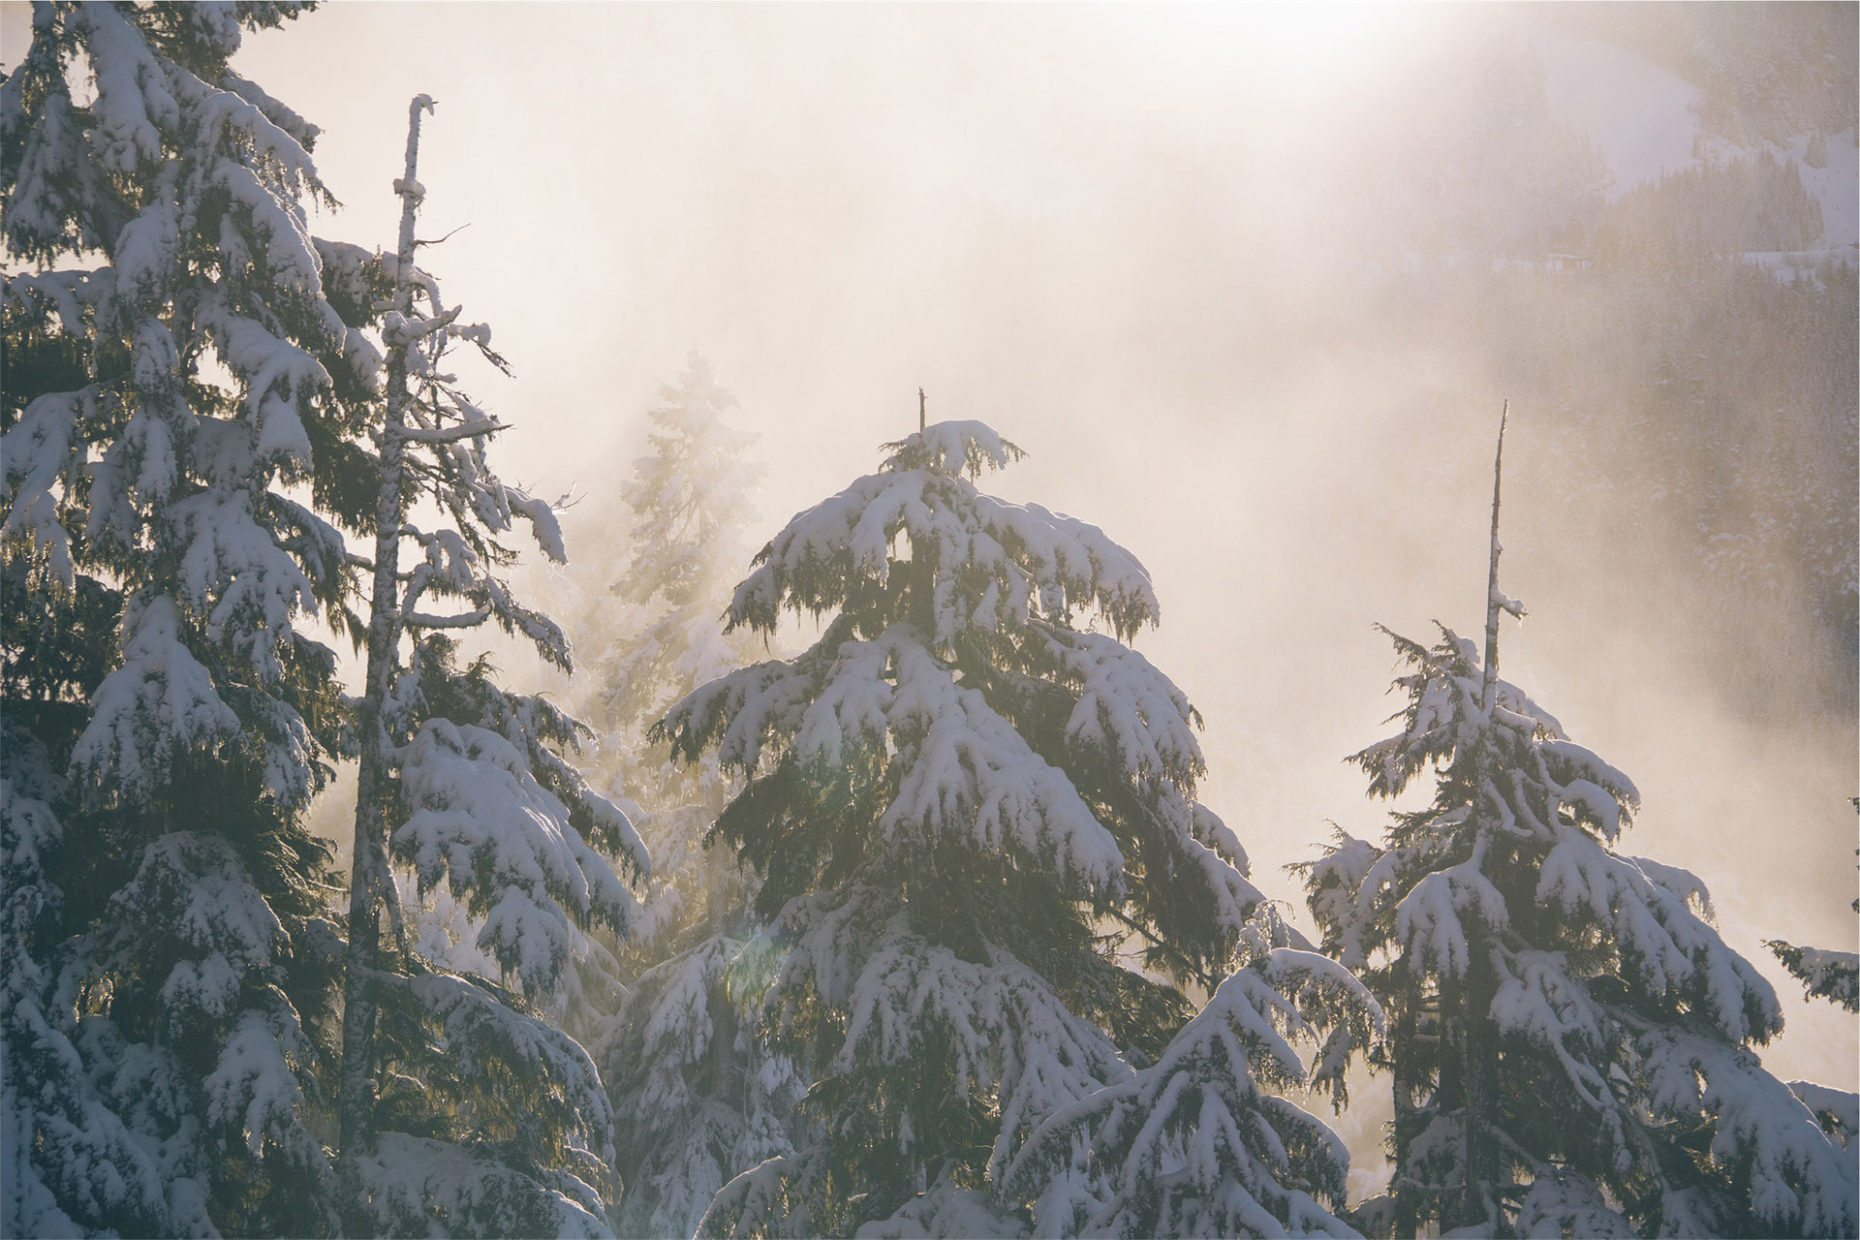 Snow on pine trees - Using a Calendar for Content Idea Generation